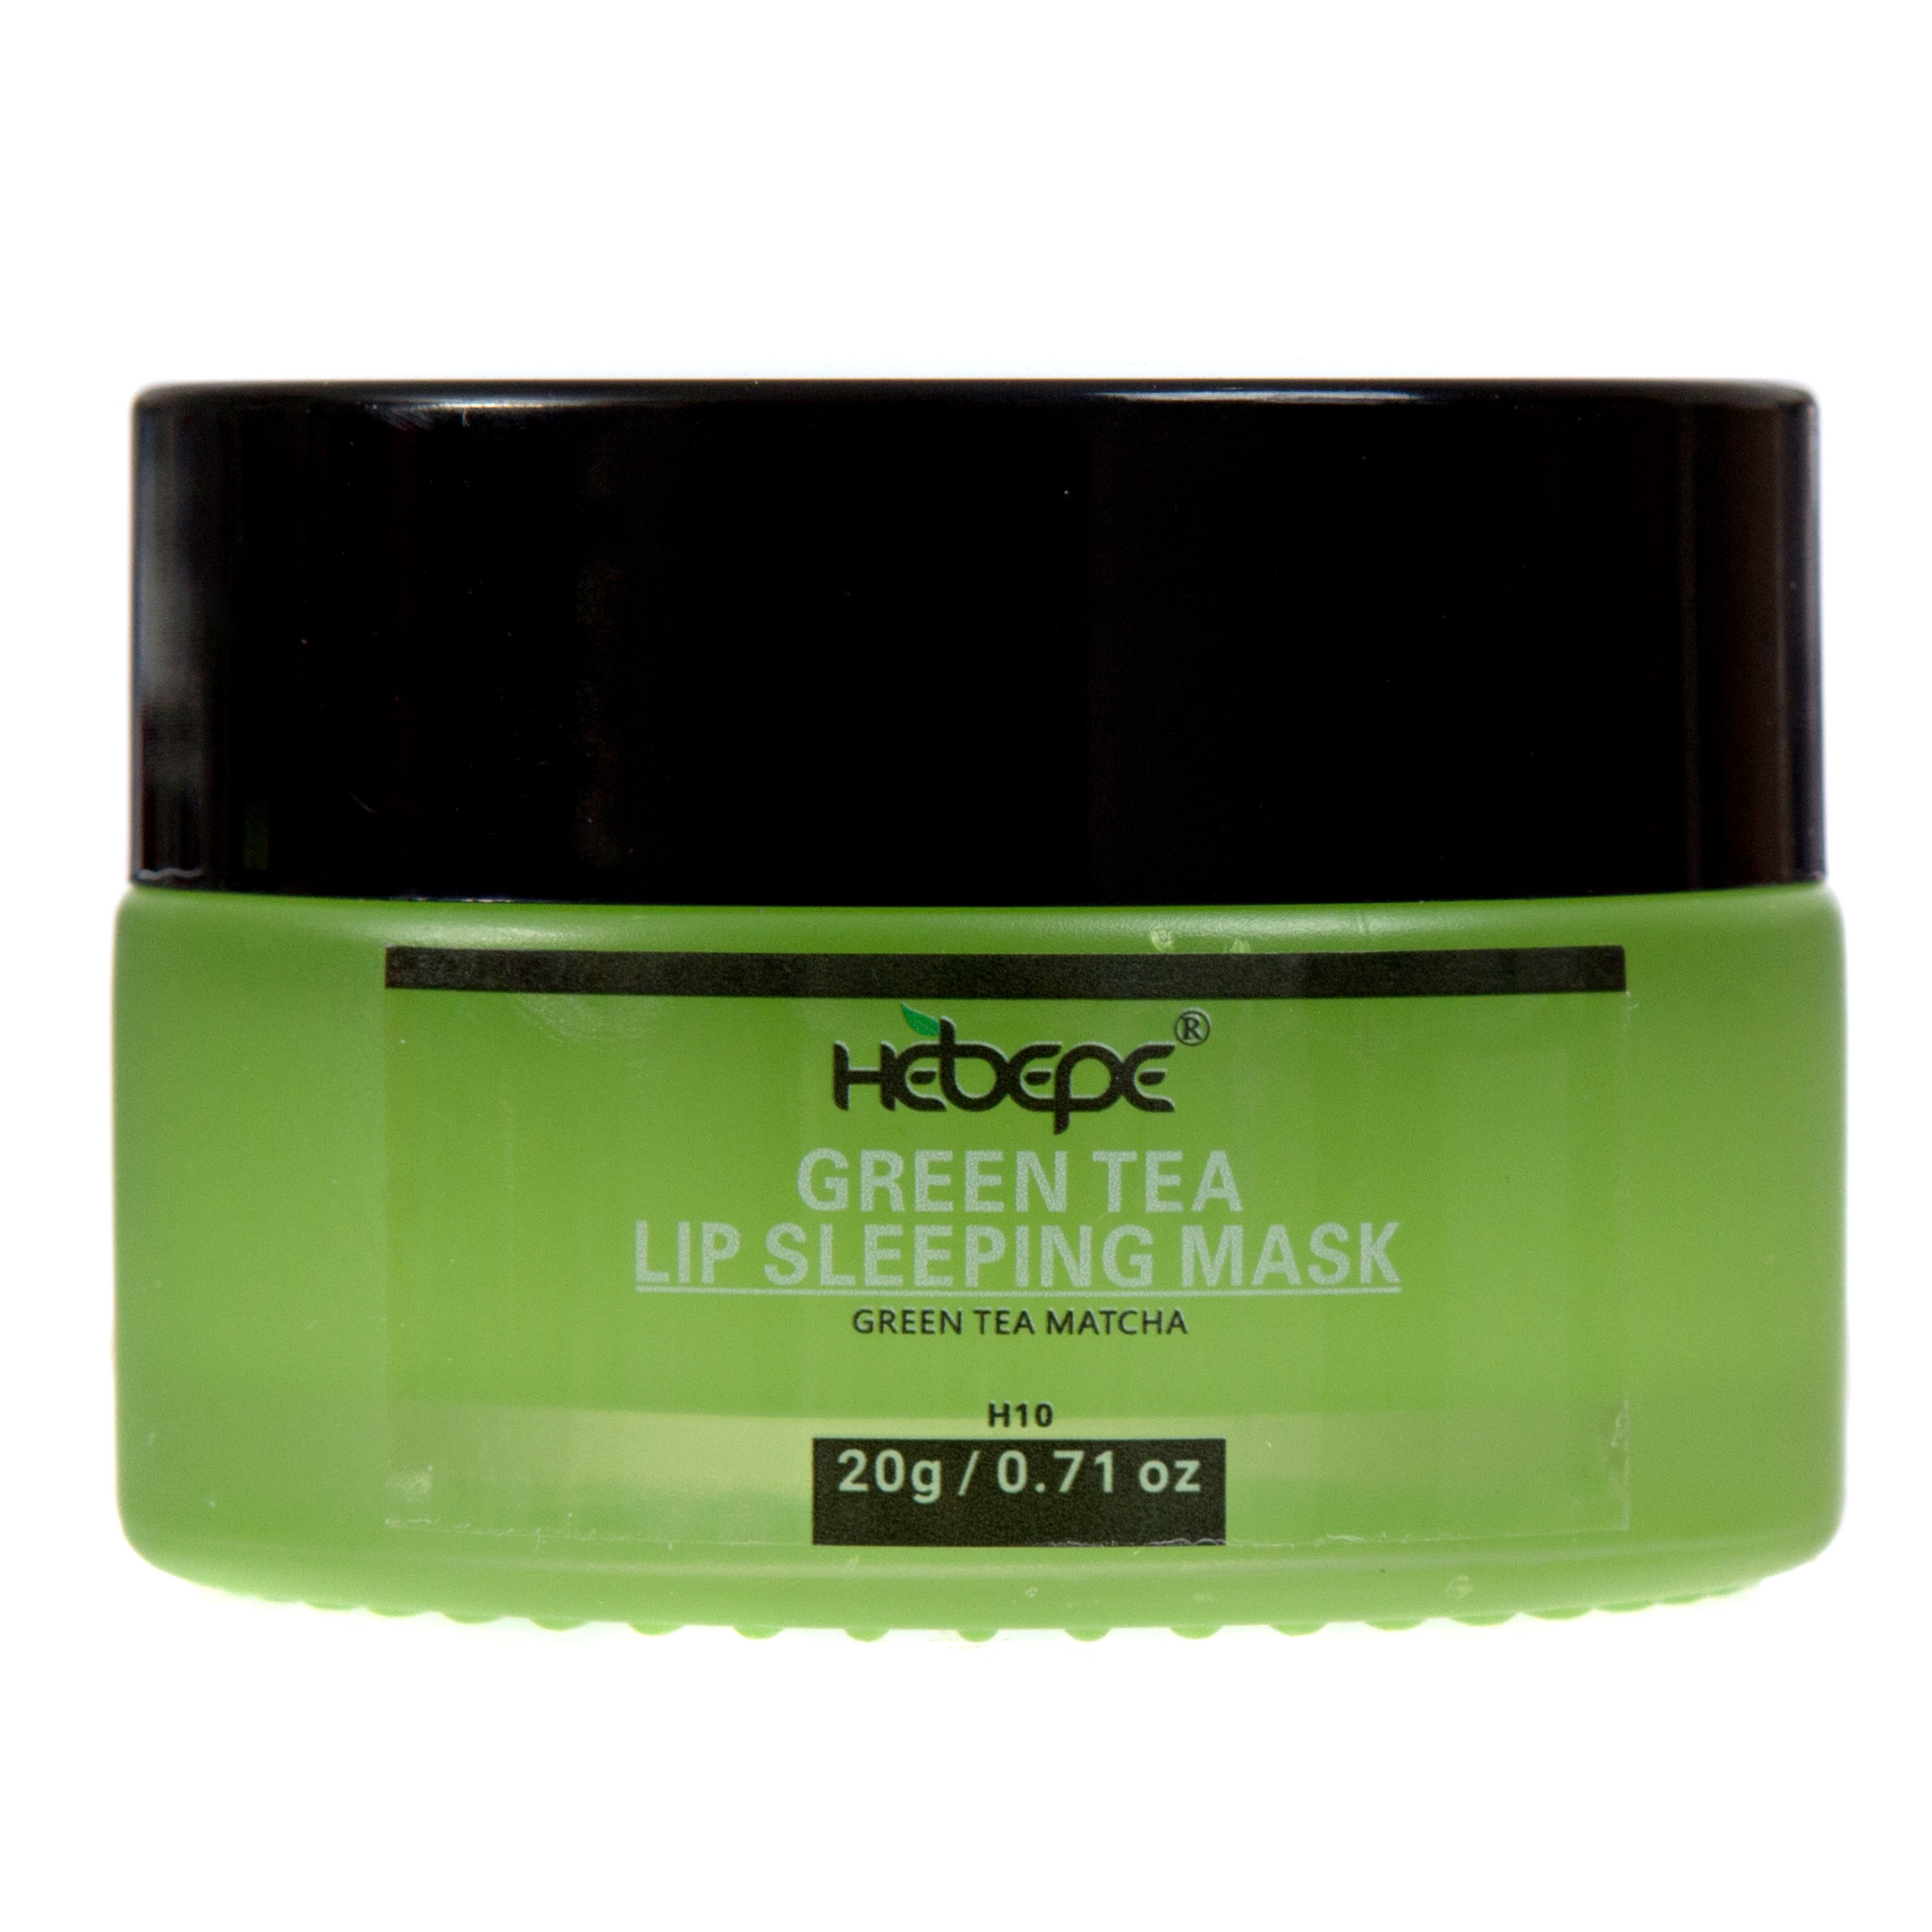 Hebepe Moisturizing Lip Sleeping Mask, Matcha Green Tea, with Coconut Oil, Vitamin E, Fig Extract, Orchid, and Shea Butter, Quick Absorption Lip Treatment for Dry, Chapped, and Cracked Lip, 0.7 Ounce - image 1 of 5